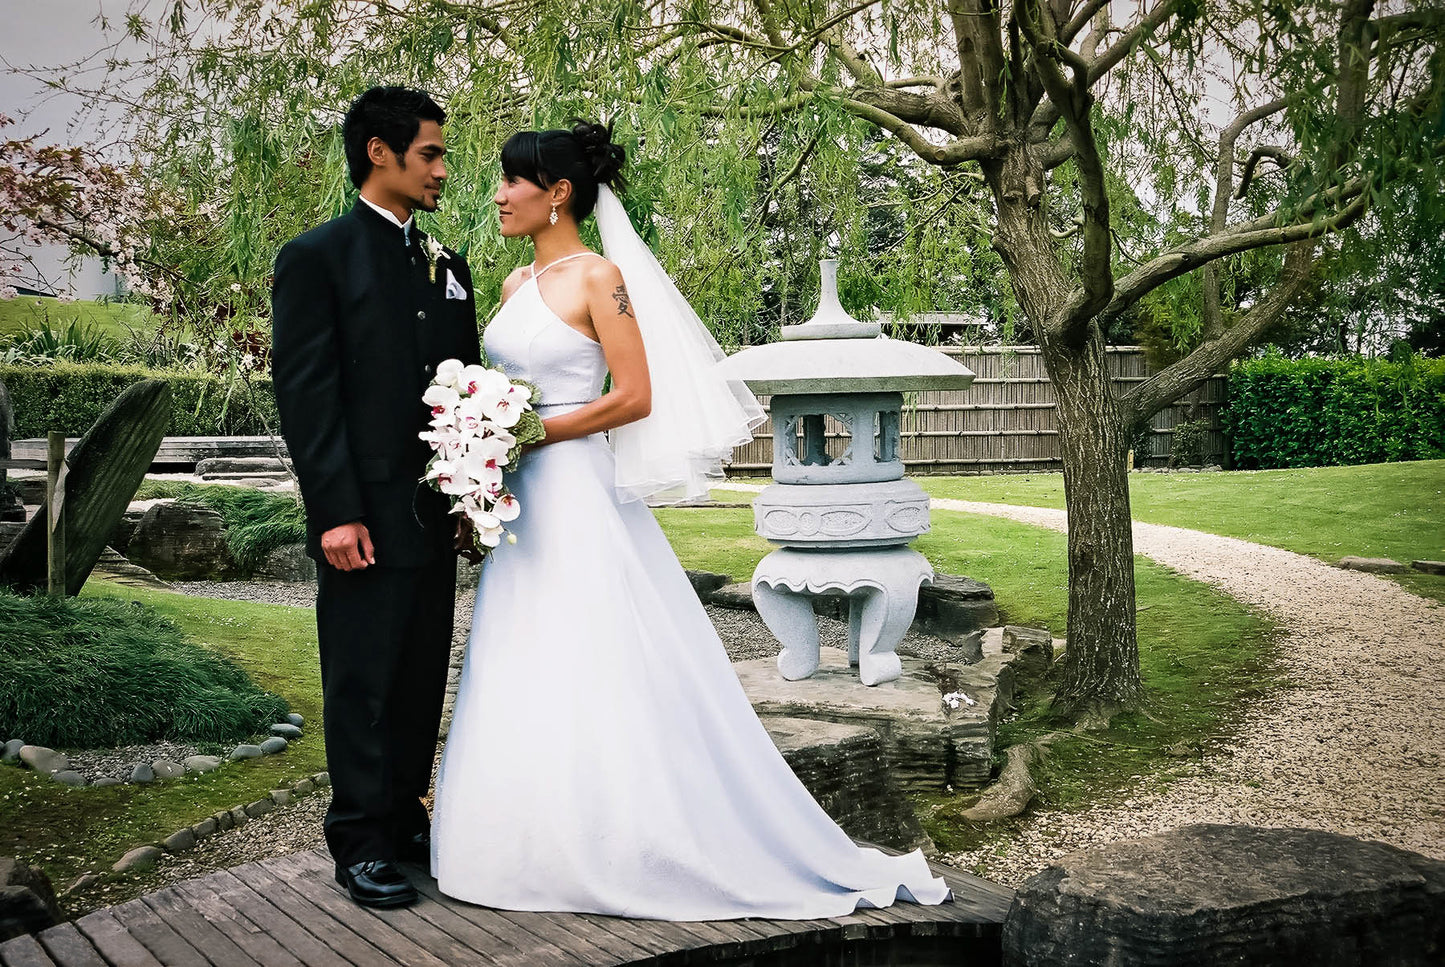 Wedding Photography Packages